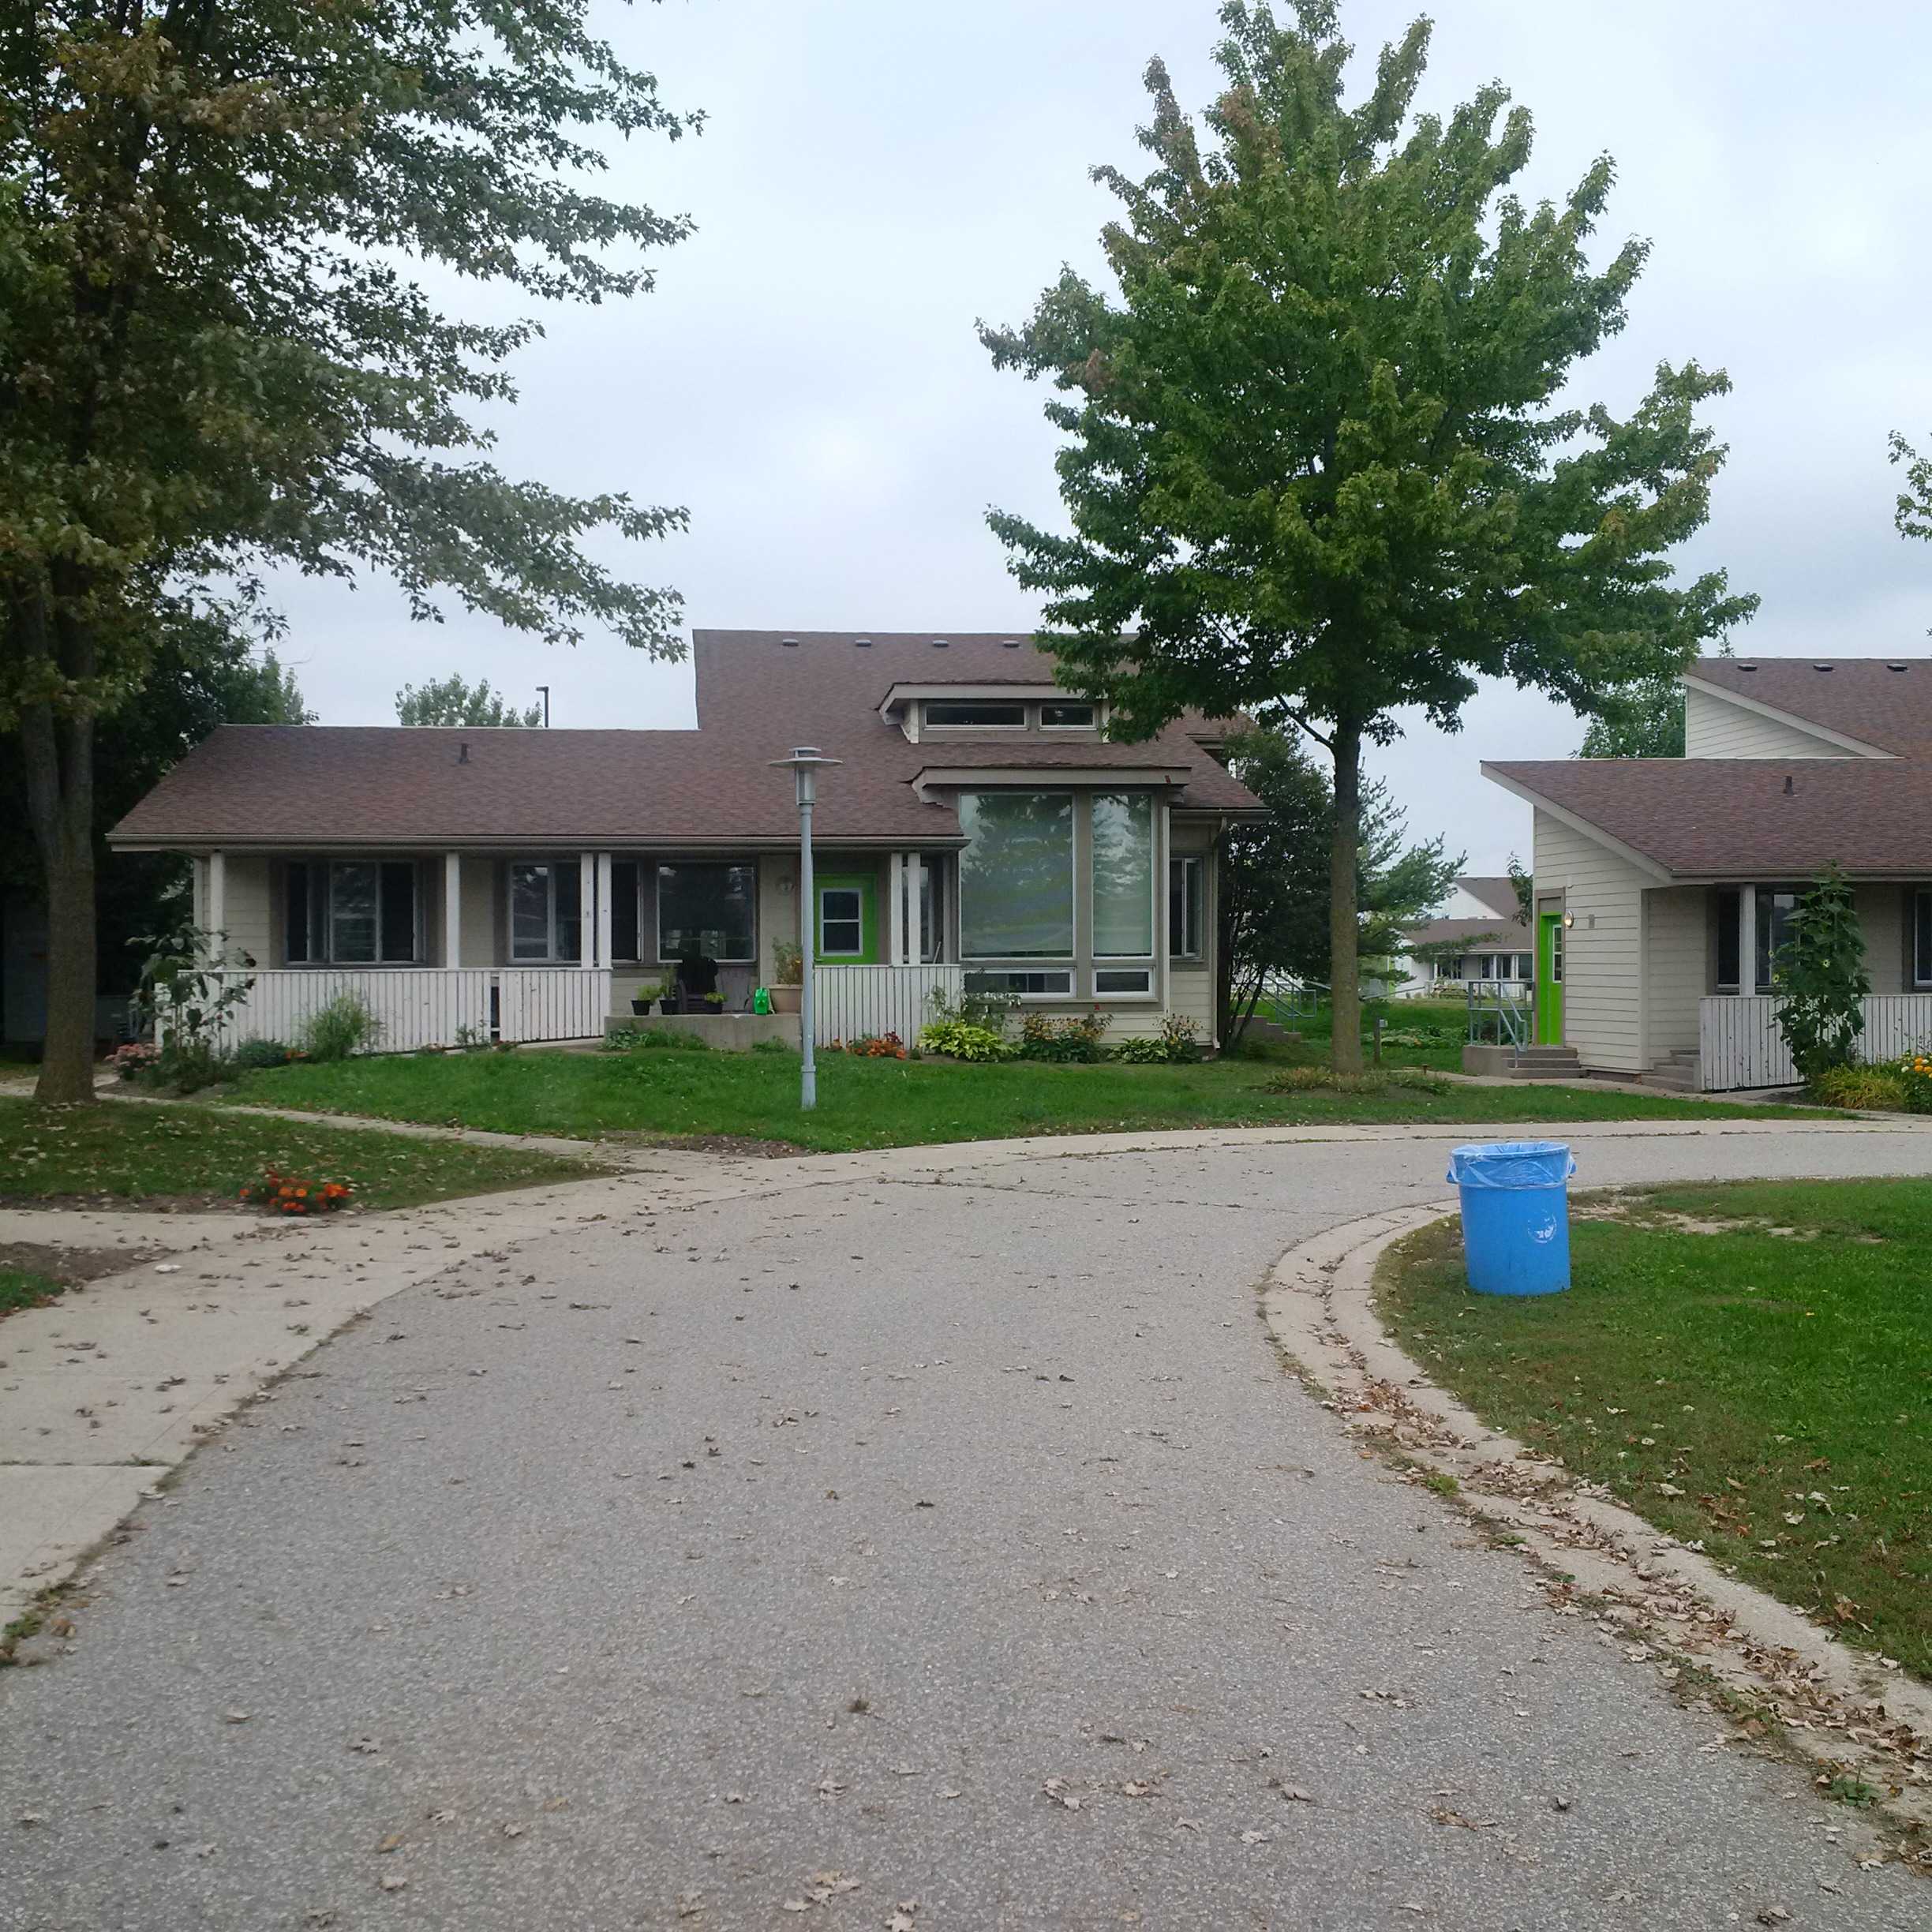 Photo of the communal living residences at Grand Valley Institution.